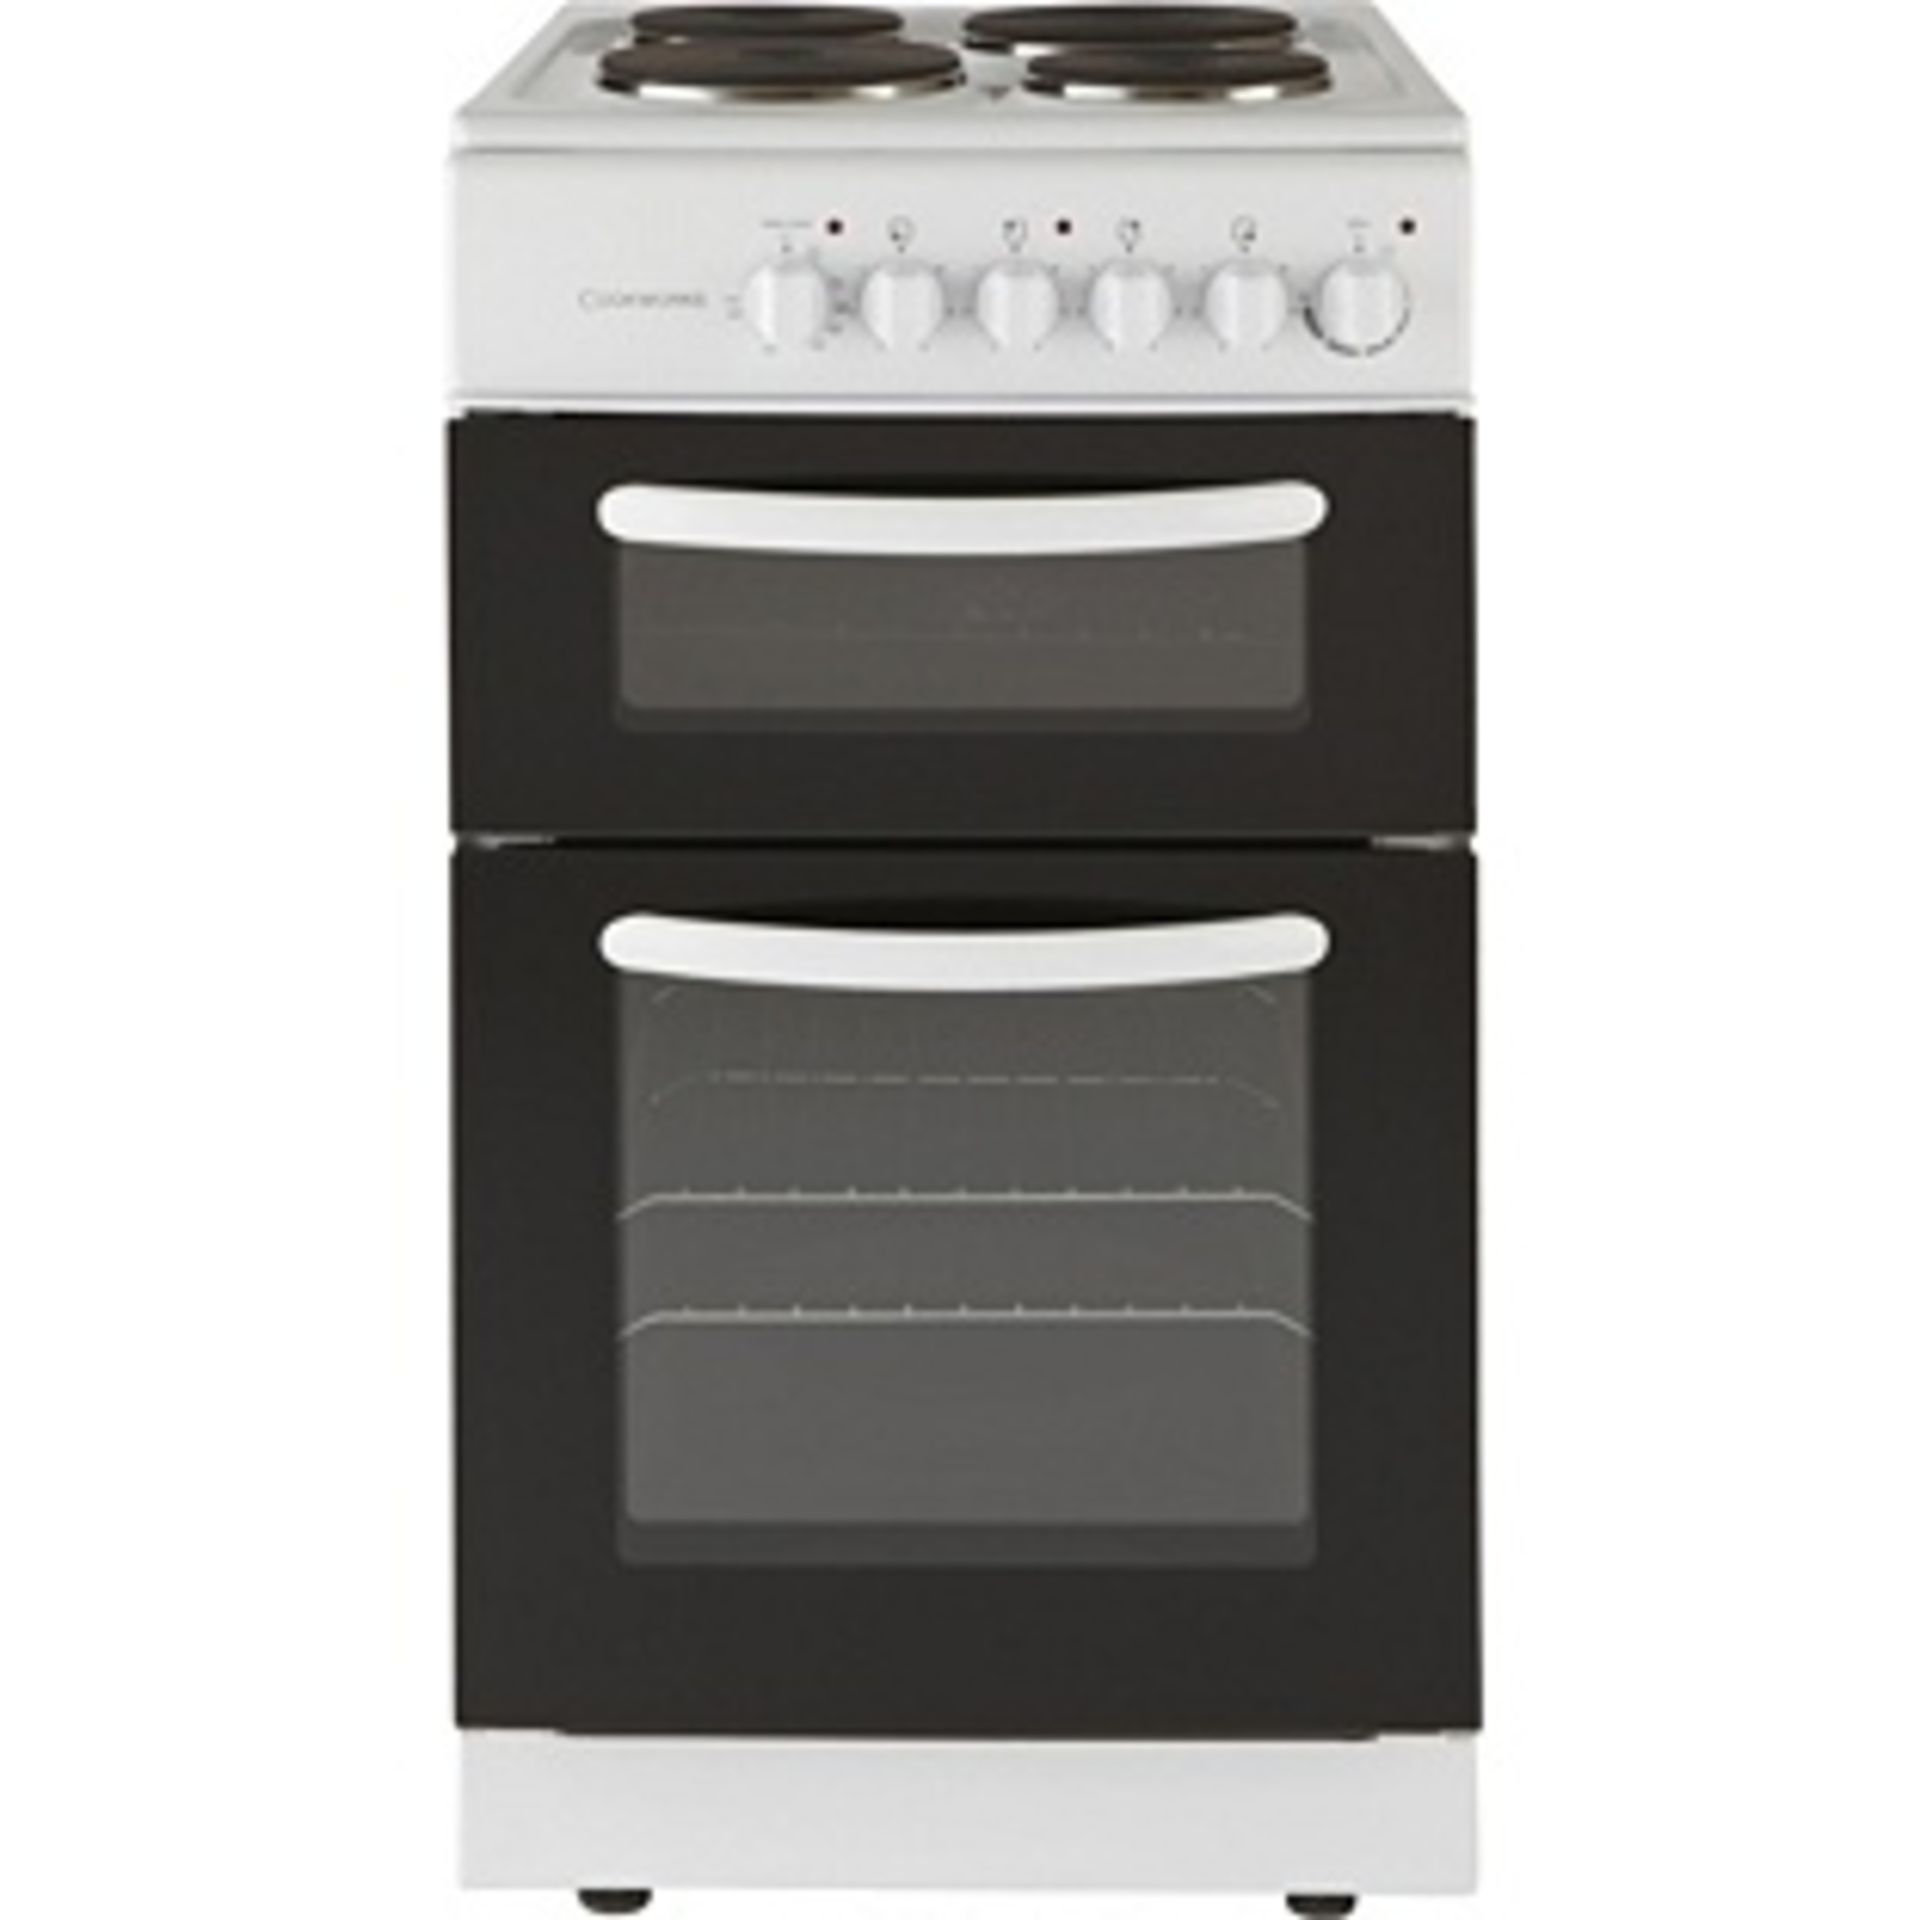 Cookworks CET50W Single Electric Cooker - White.